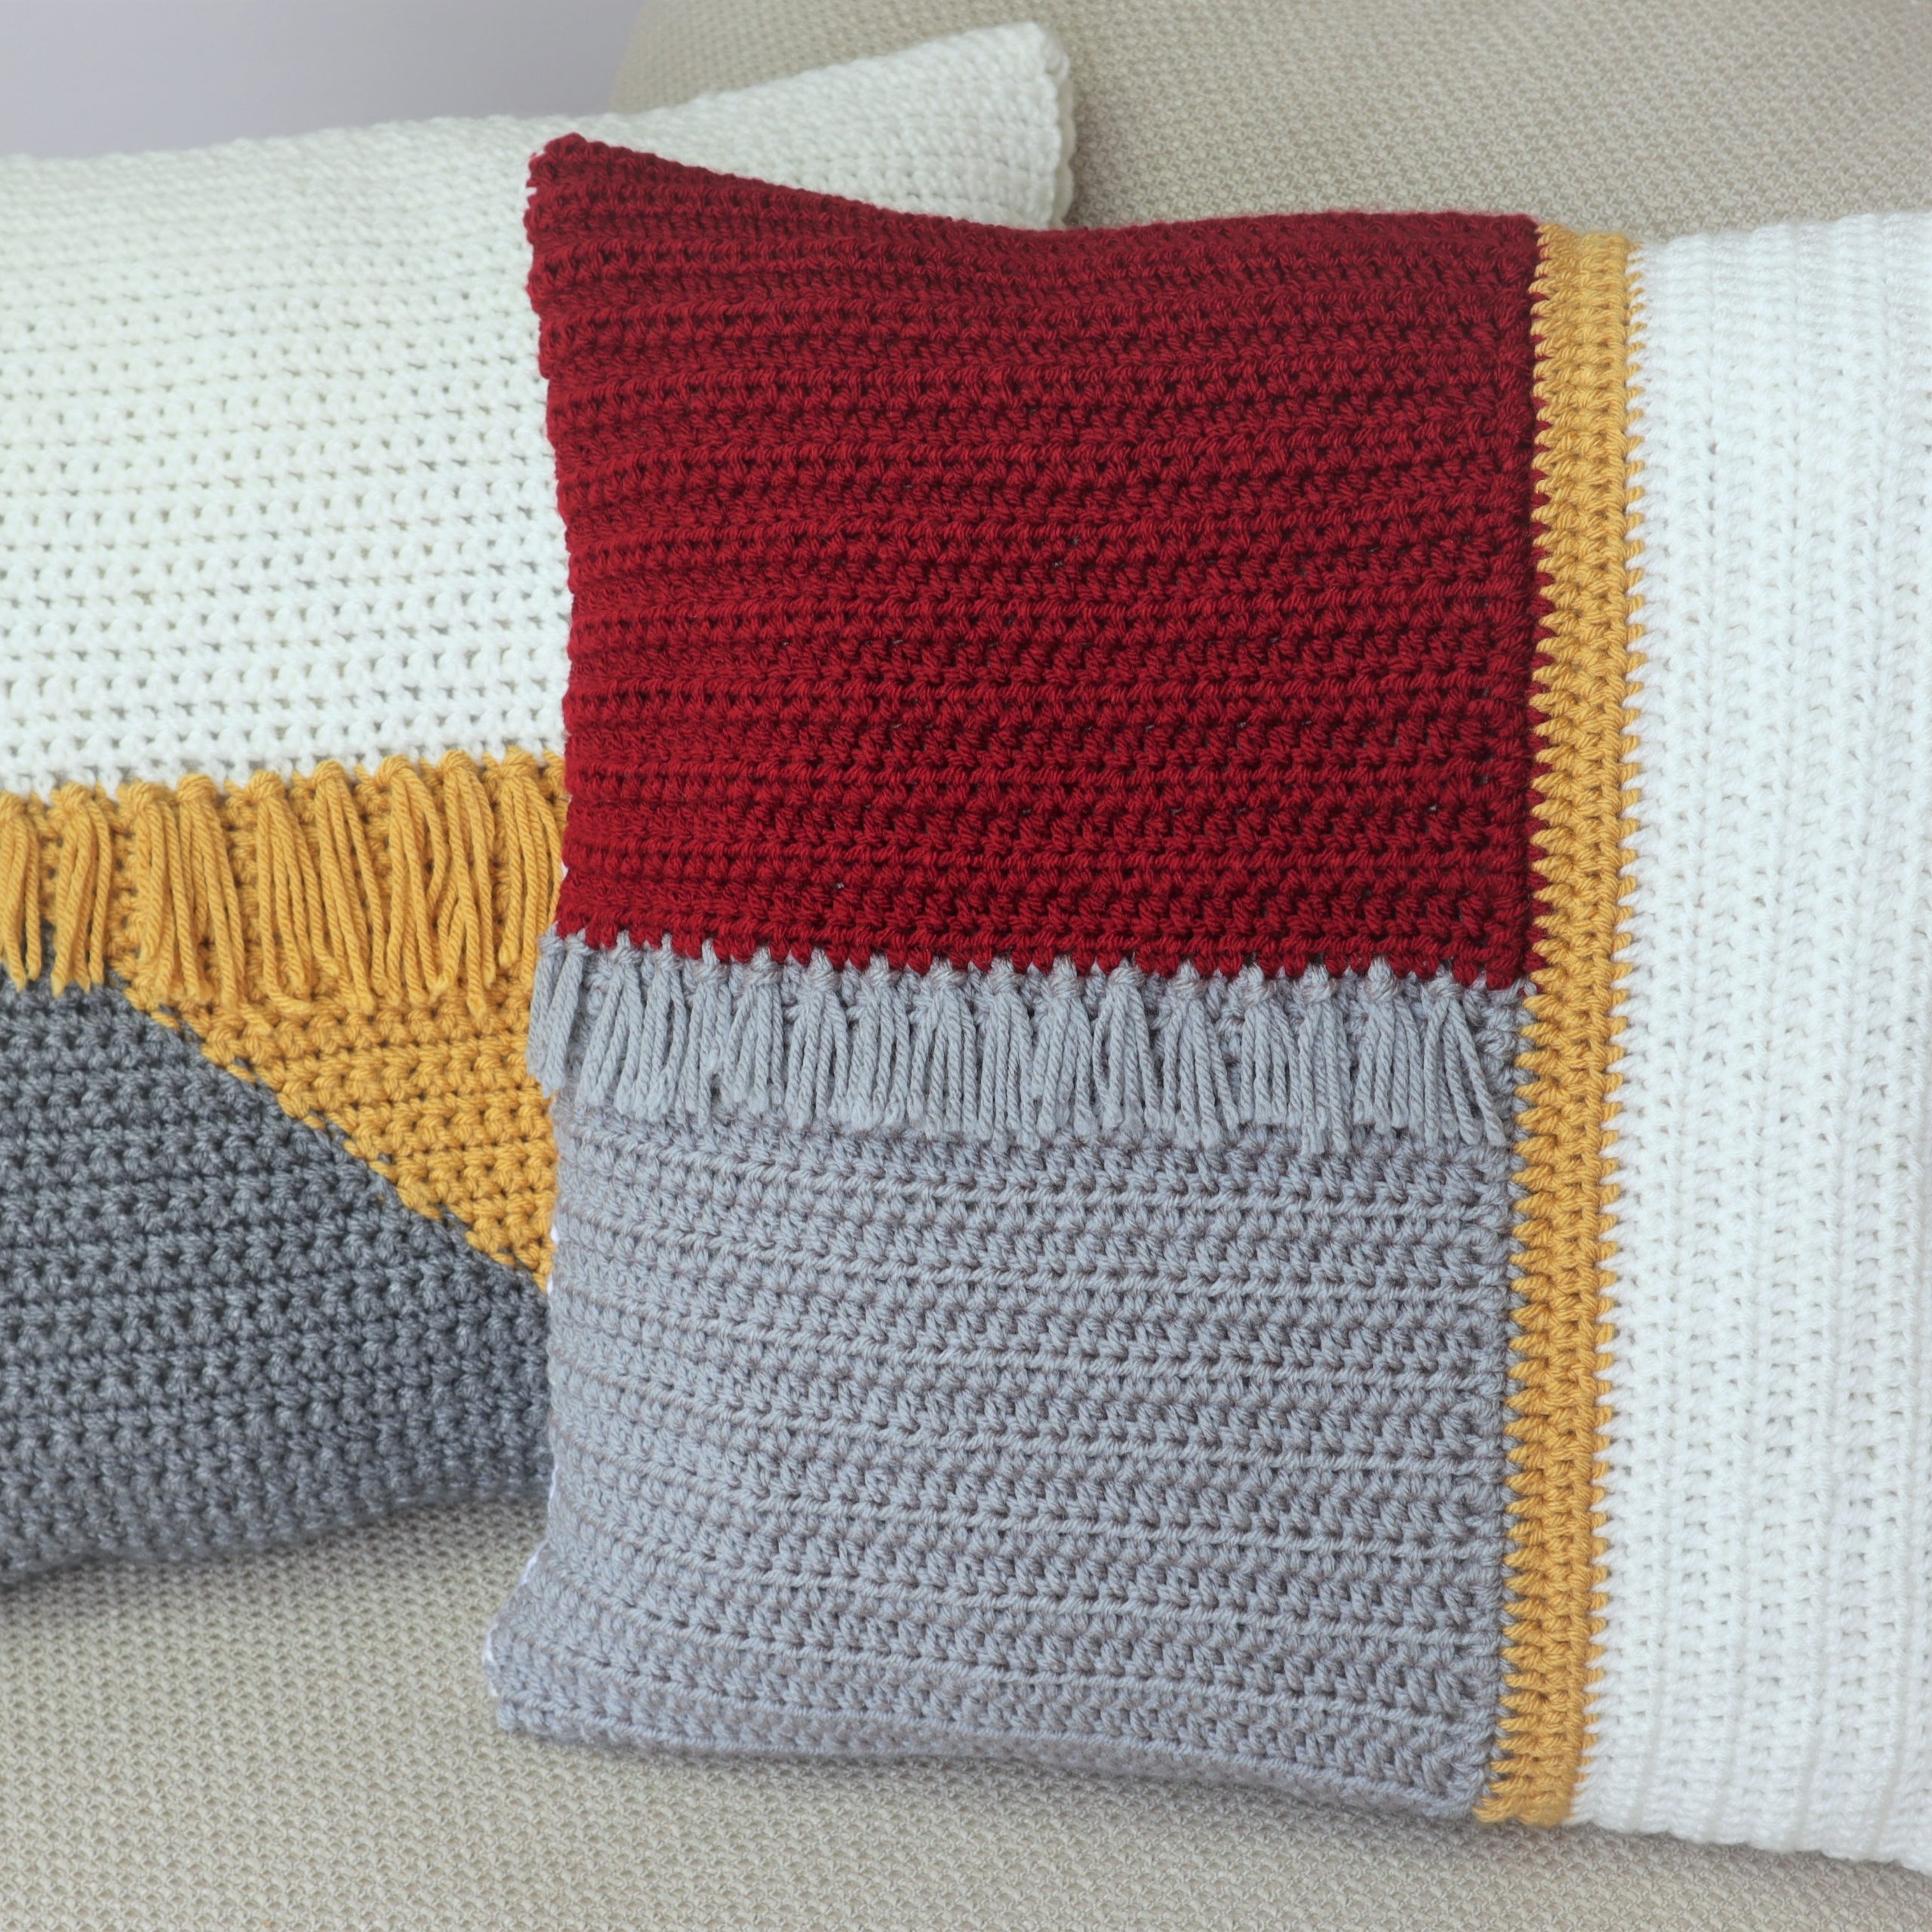 crochet pillows to sell at craft shows